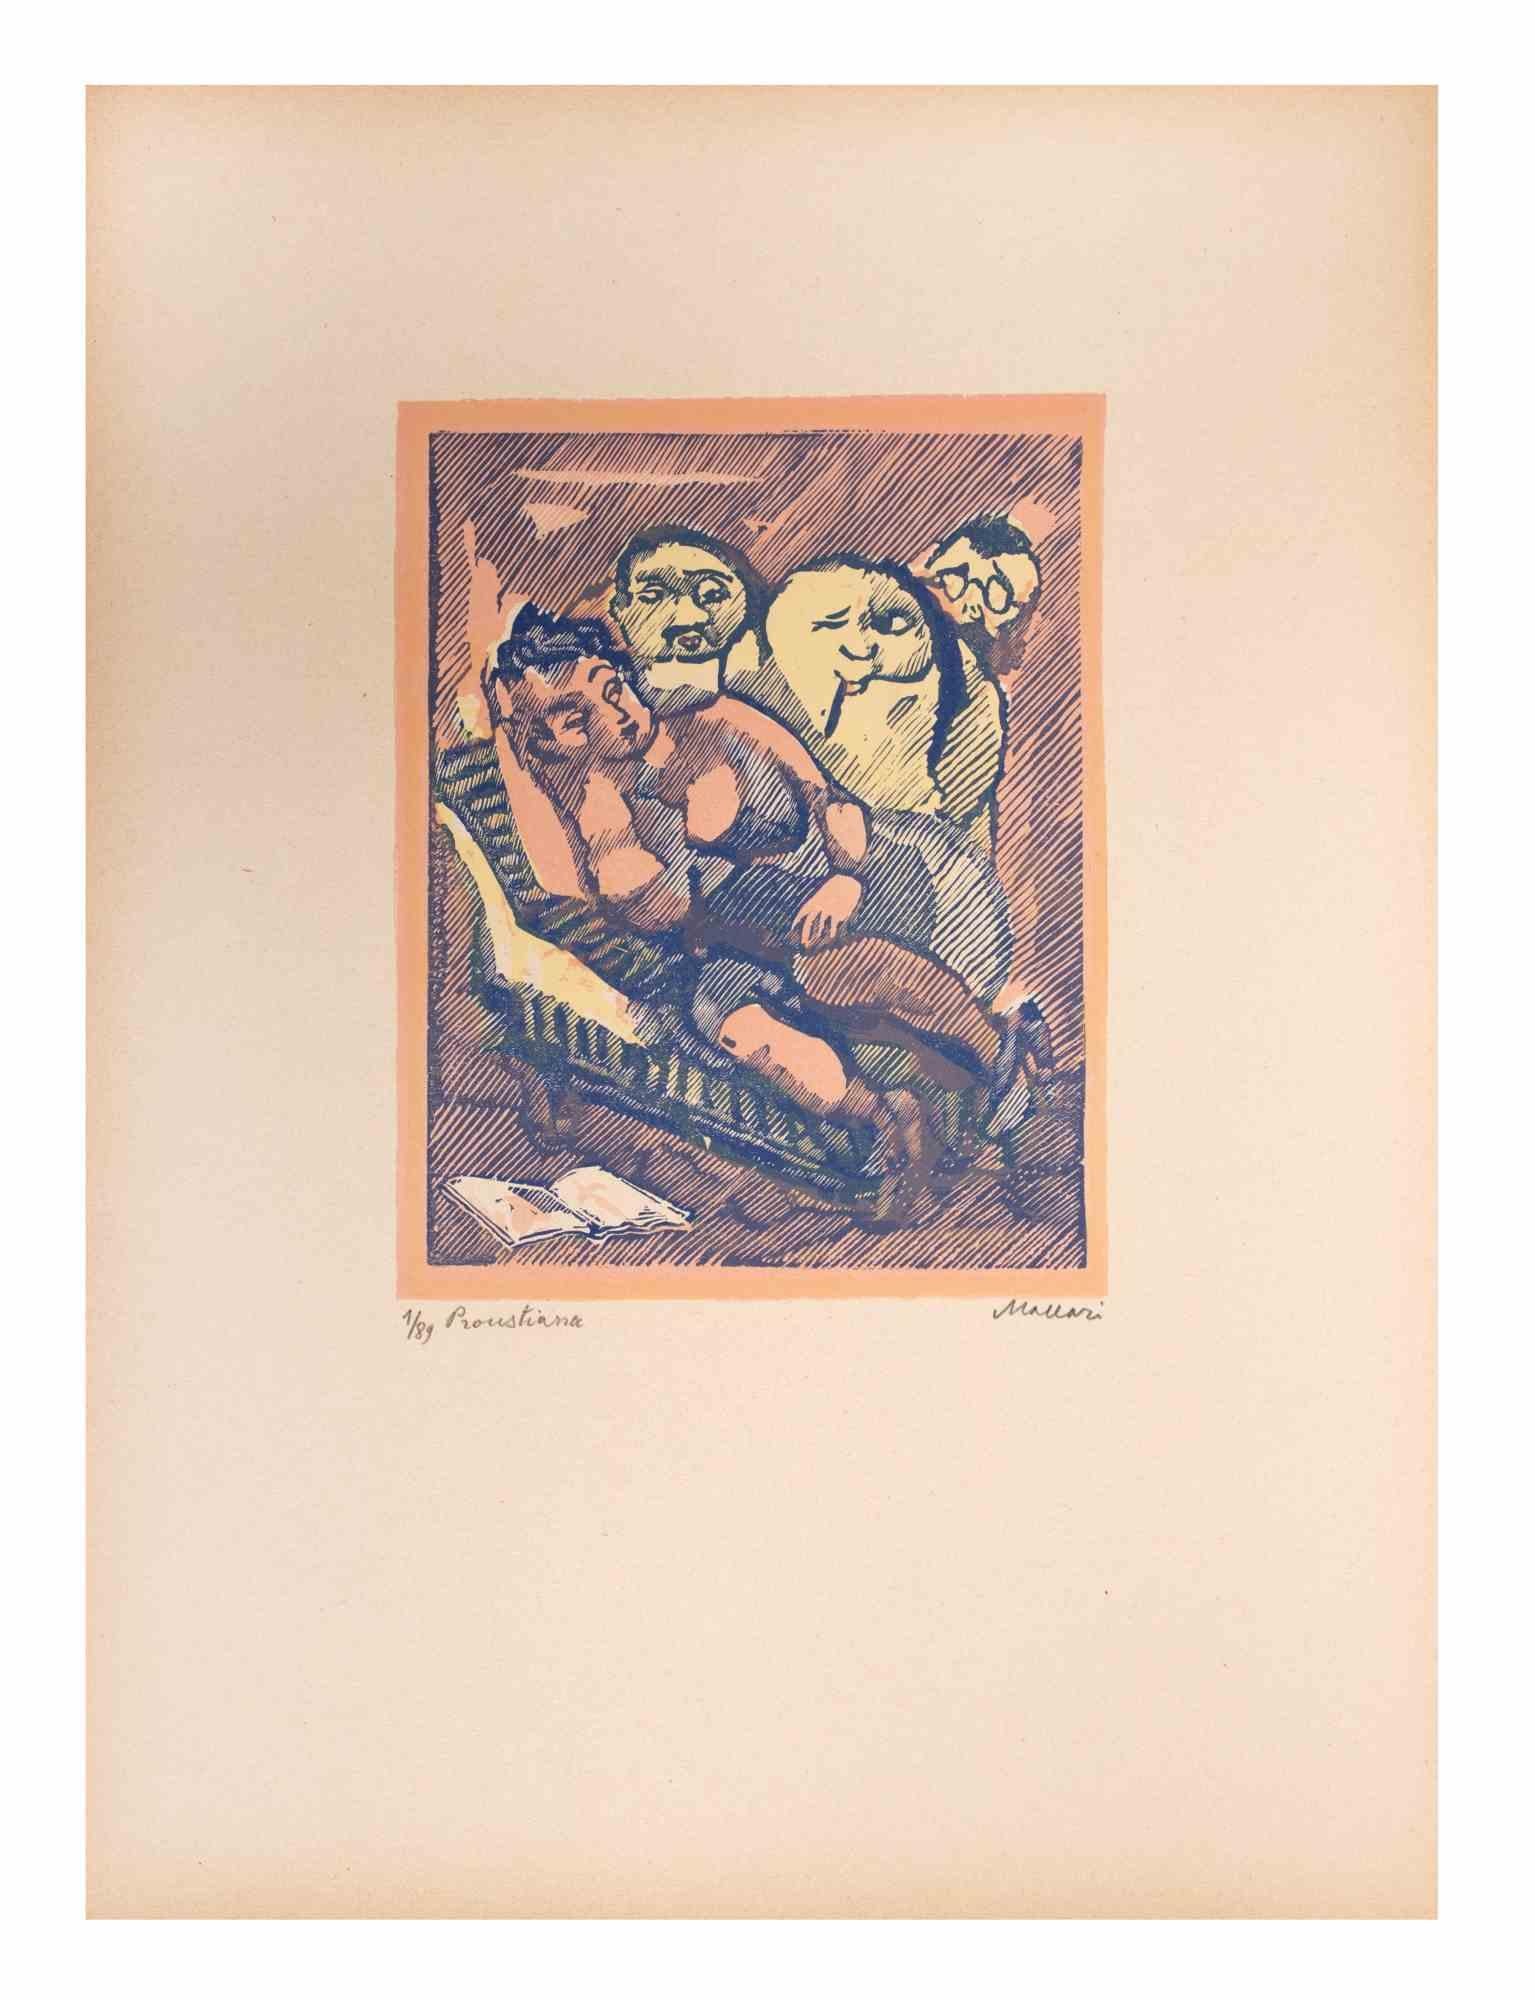 Proustian (Proustiana) is an Artwork realized by Mino Maccari  (1924-1989) in the Mid-20th Century.

Colored woodcut on paper. Hand-signed on the lower, numbered 1/89 specimens and titled on the left margin.

Good conditions.

Mino Maccari (Siena,